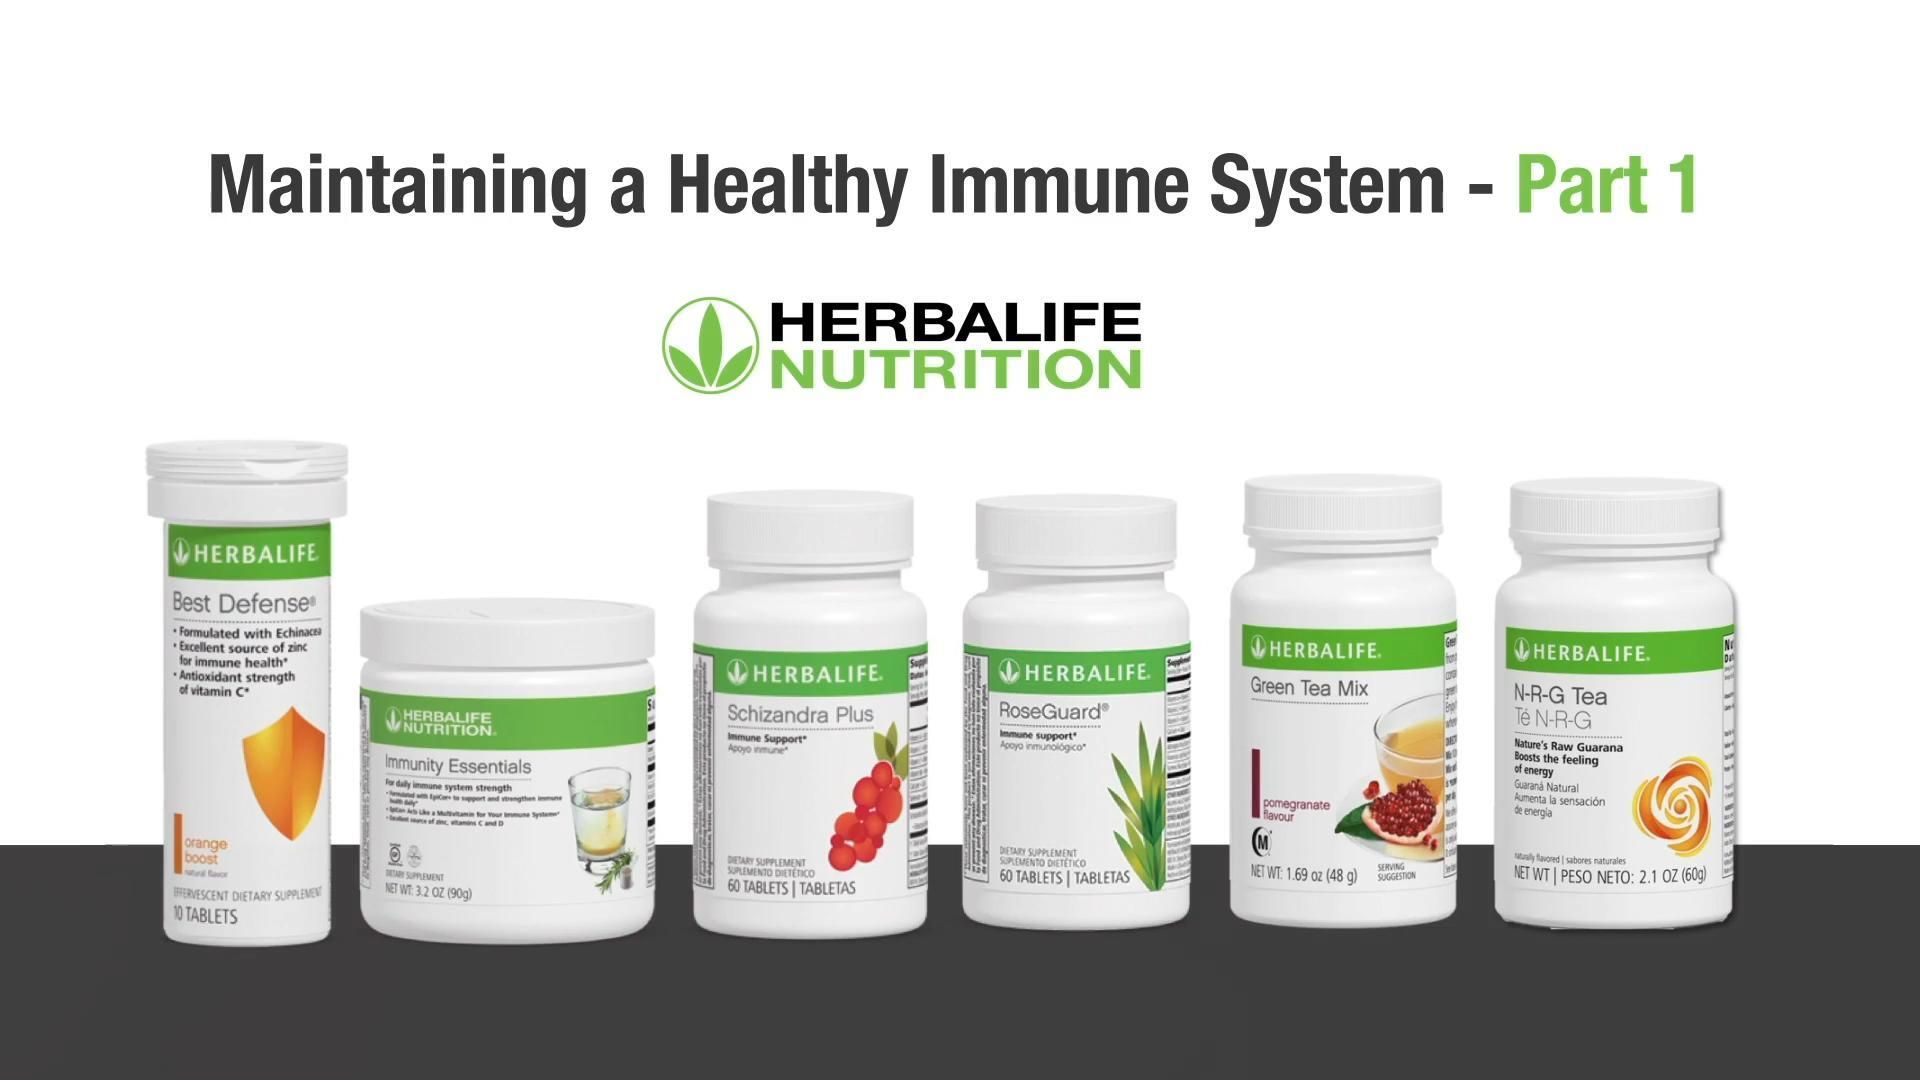 Maintaining a Healthy Immune System - Part 1